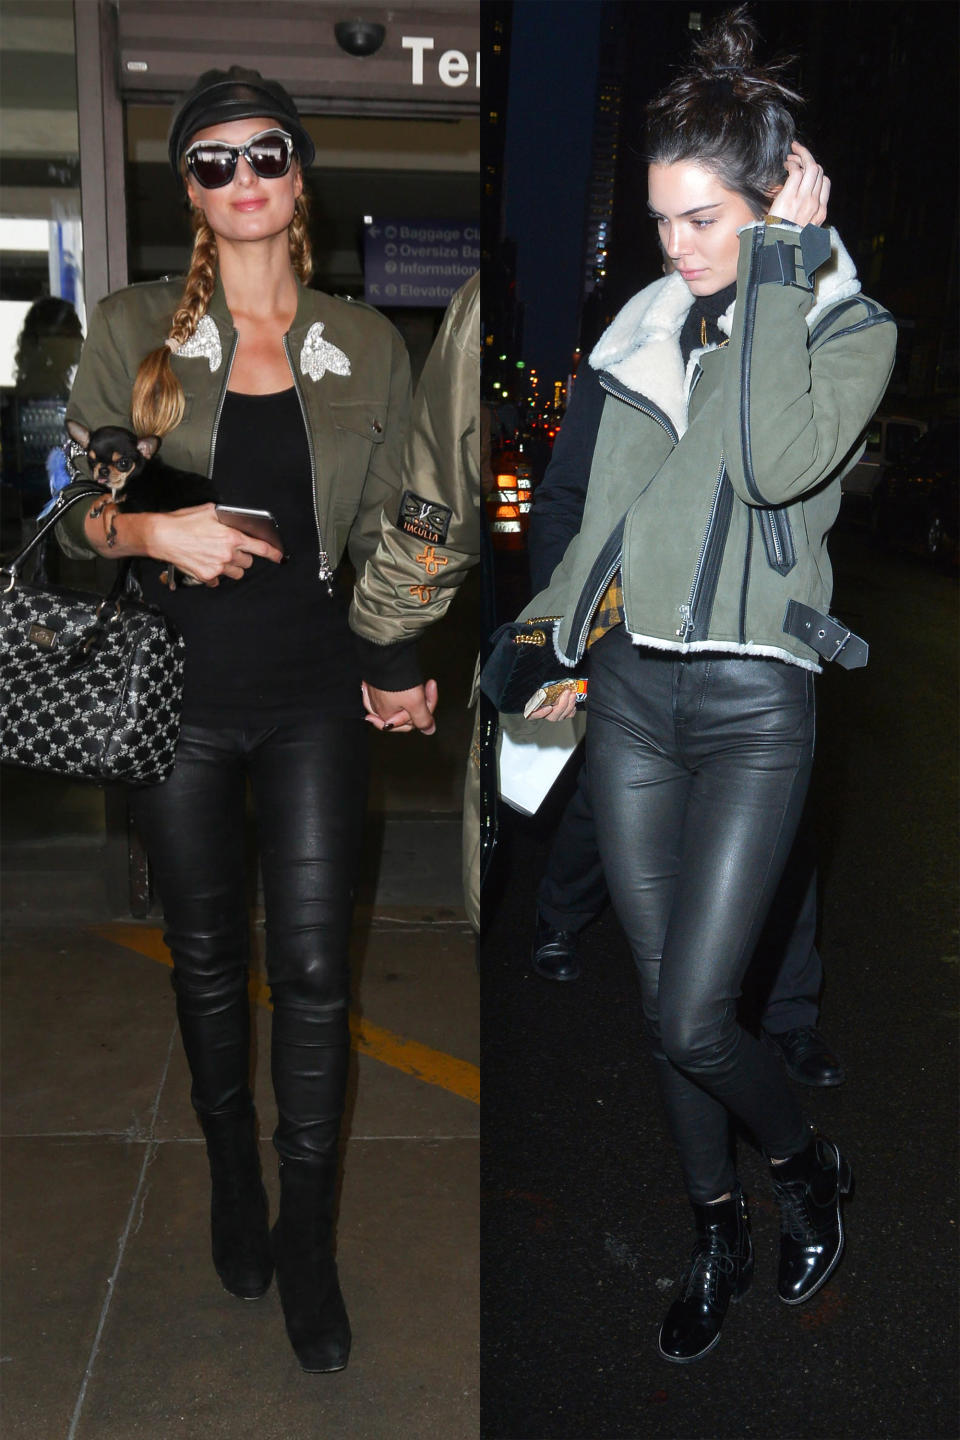 5) Army-Green Jackets With Black Leather Pants and Booties